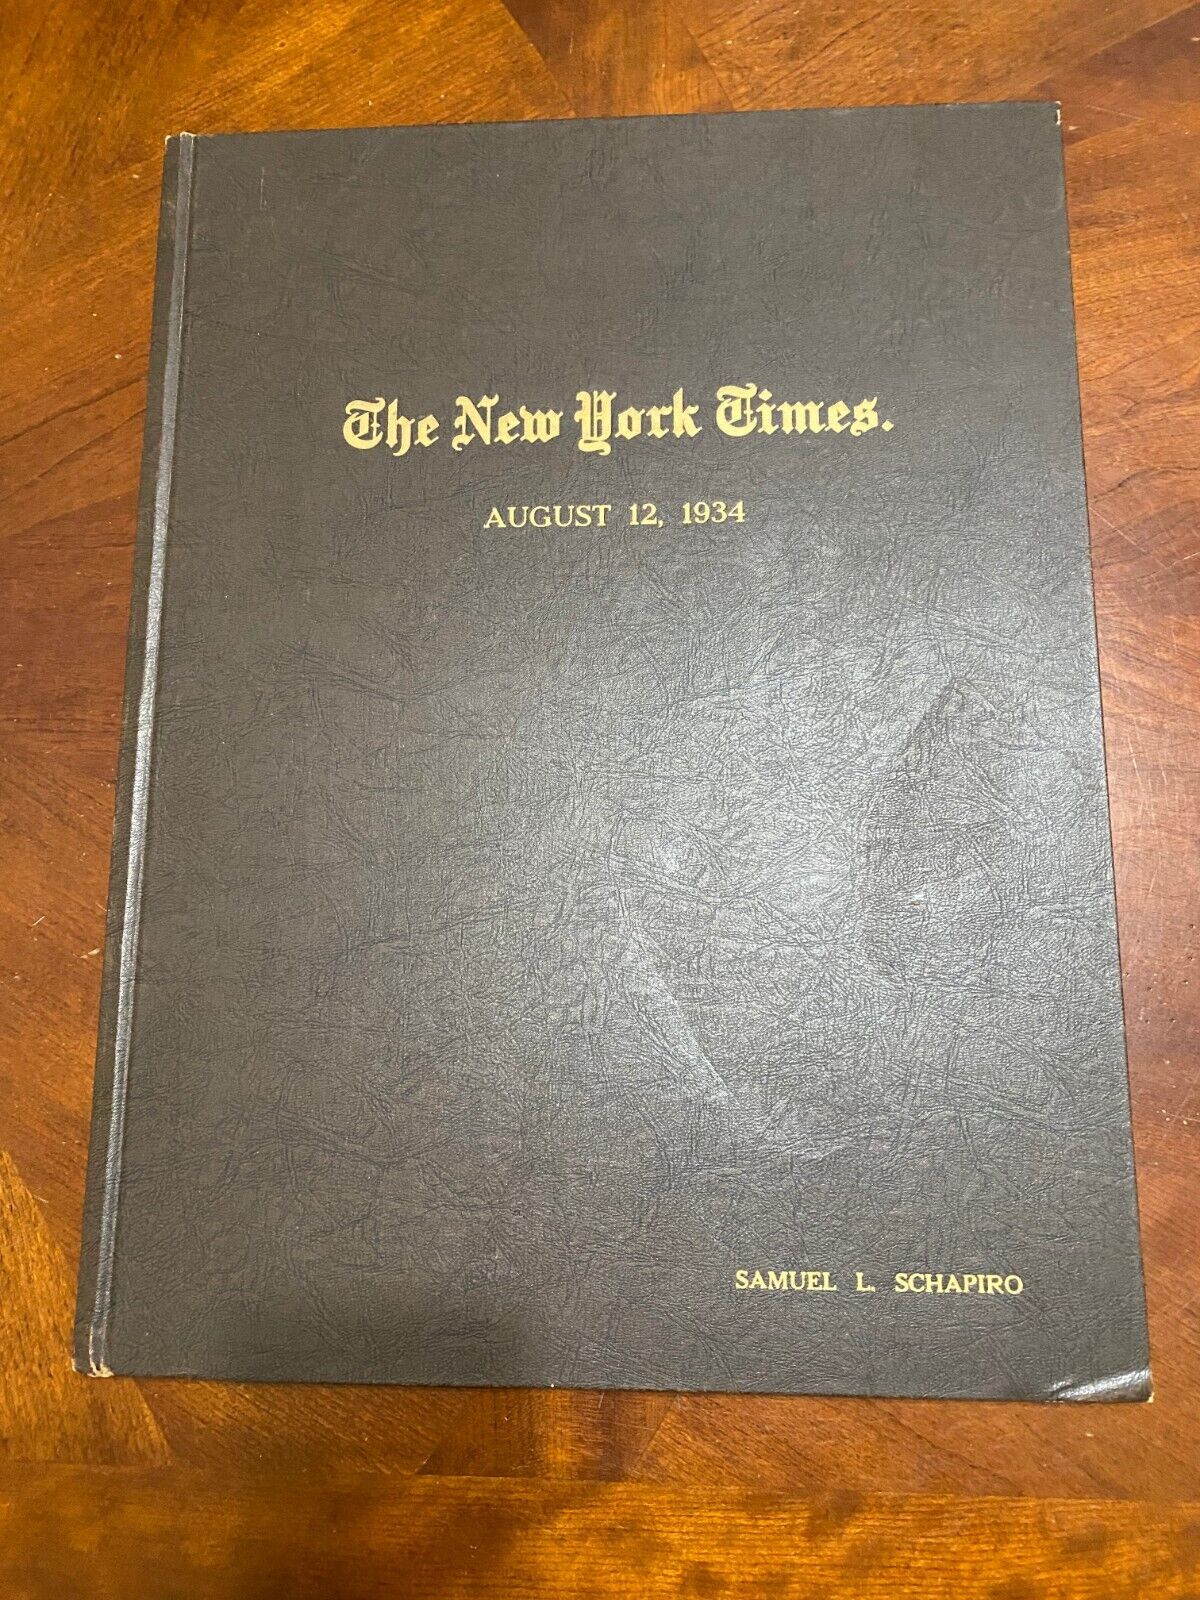 Authentic Original Aug 12 1934 The New York Times Complete Newspaper Bound w COA